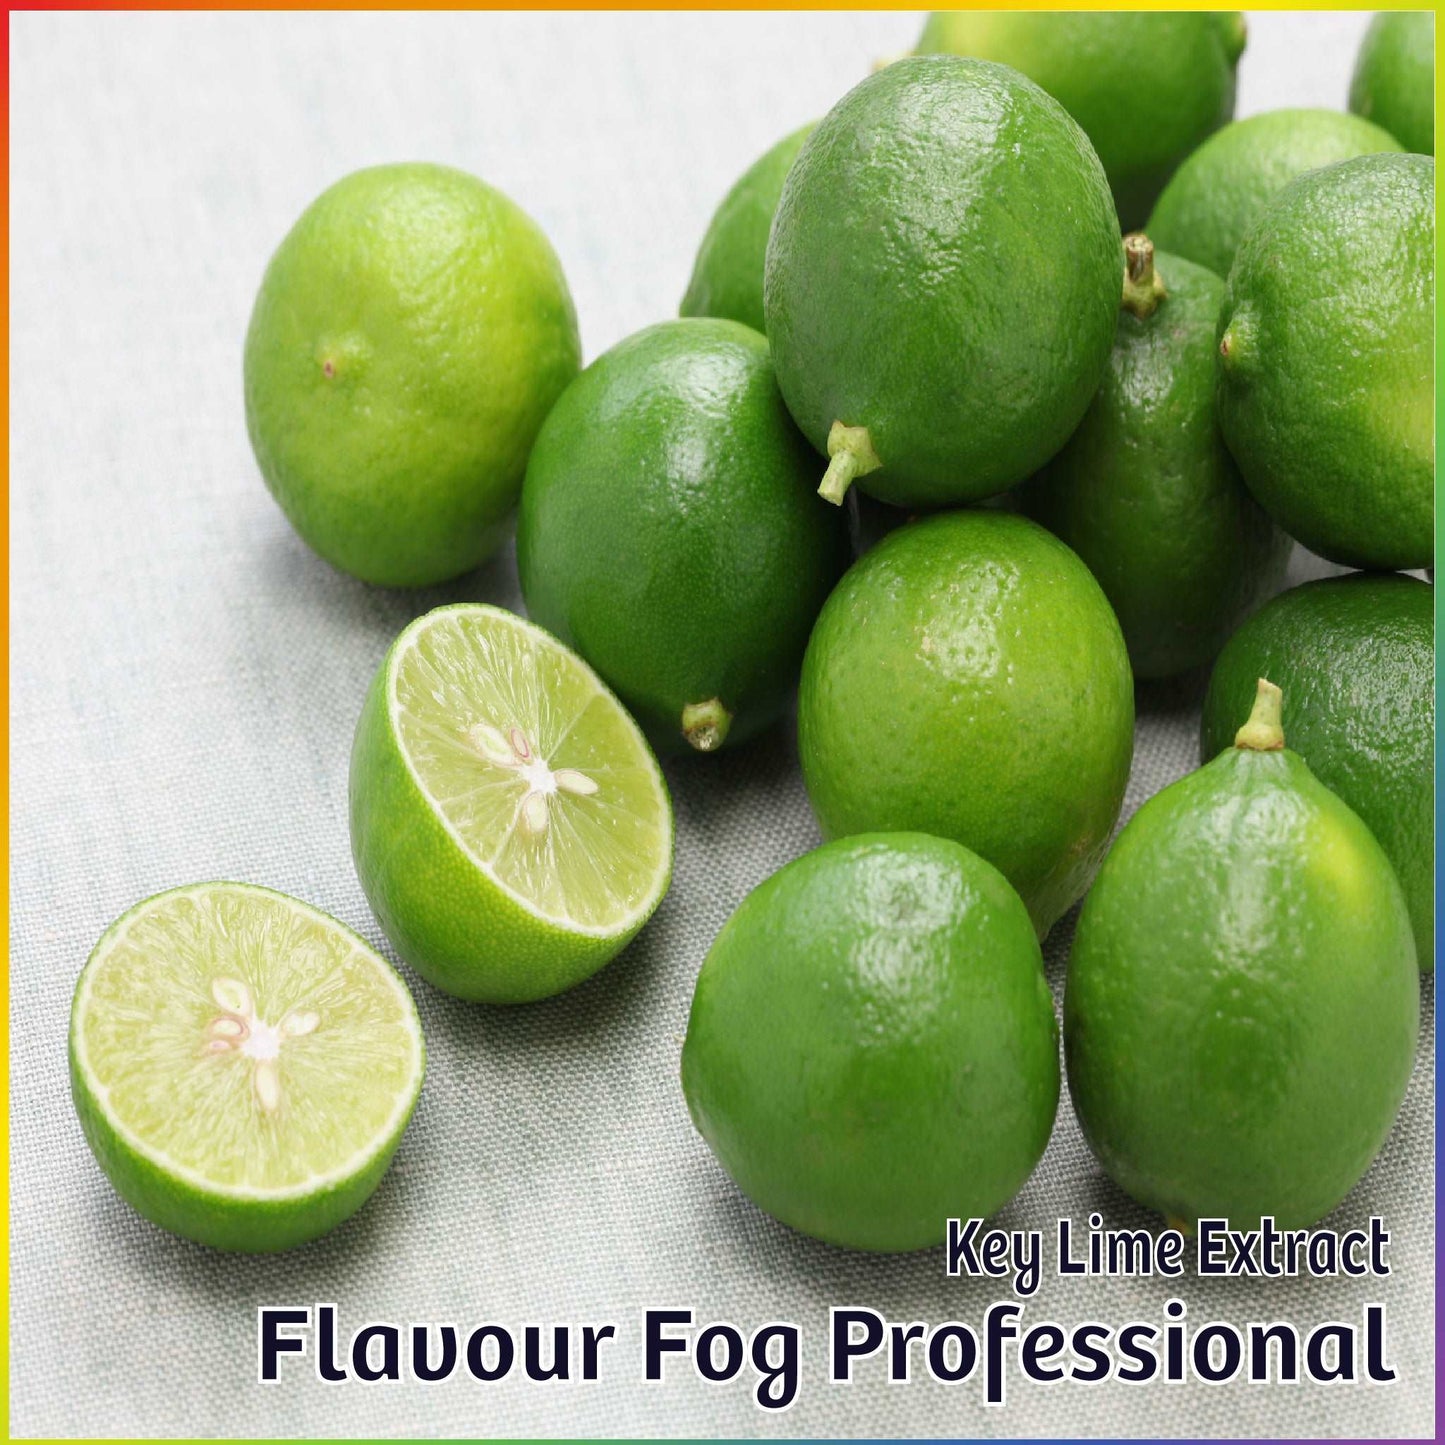 Key Lime Extract - FF Pro - Flavour Fog - Canada's flavour depot.